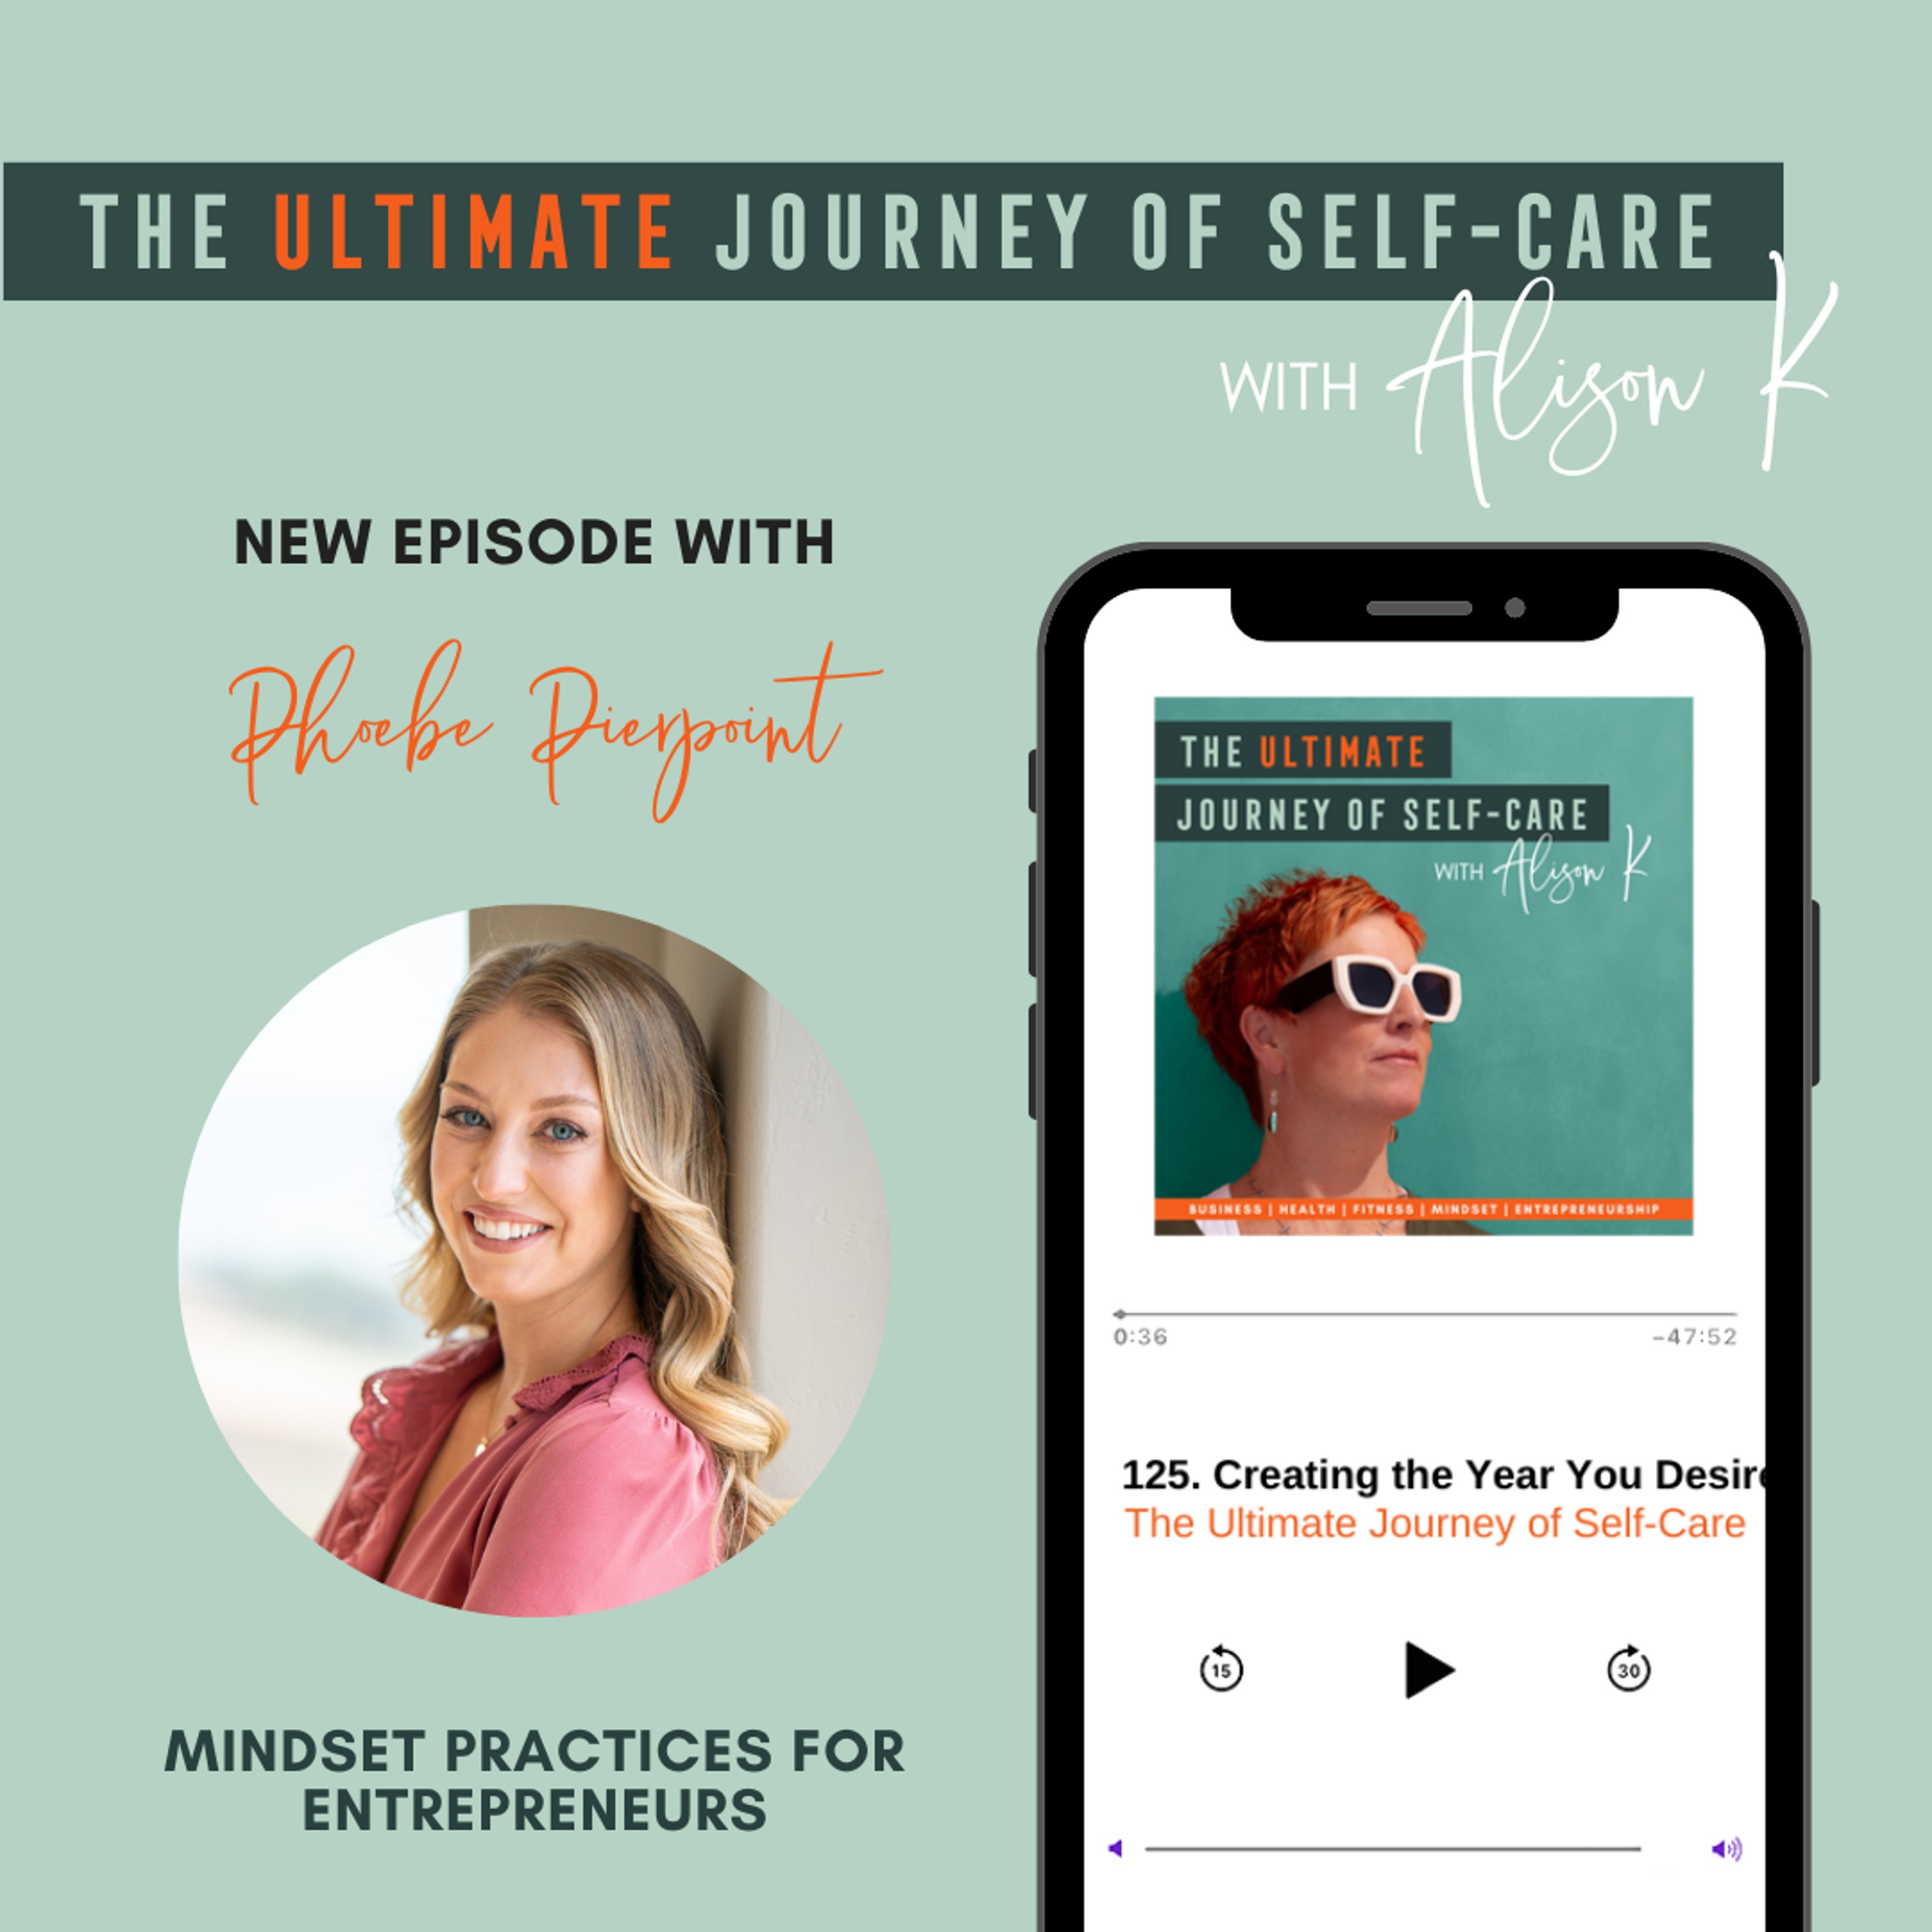 Mindset Practices for Entrepreneurs with Phoebe Pierpoint